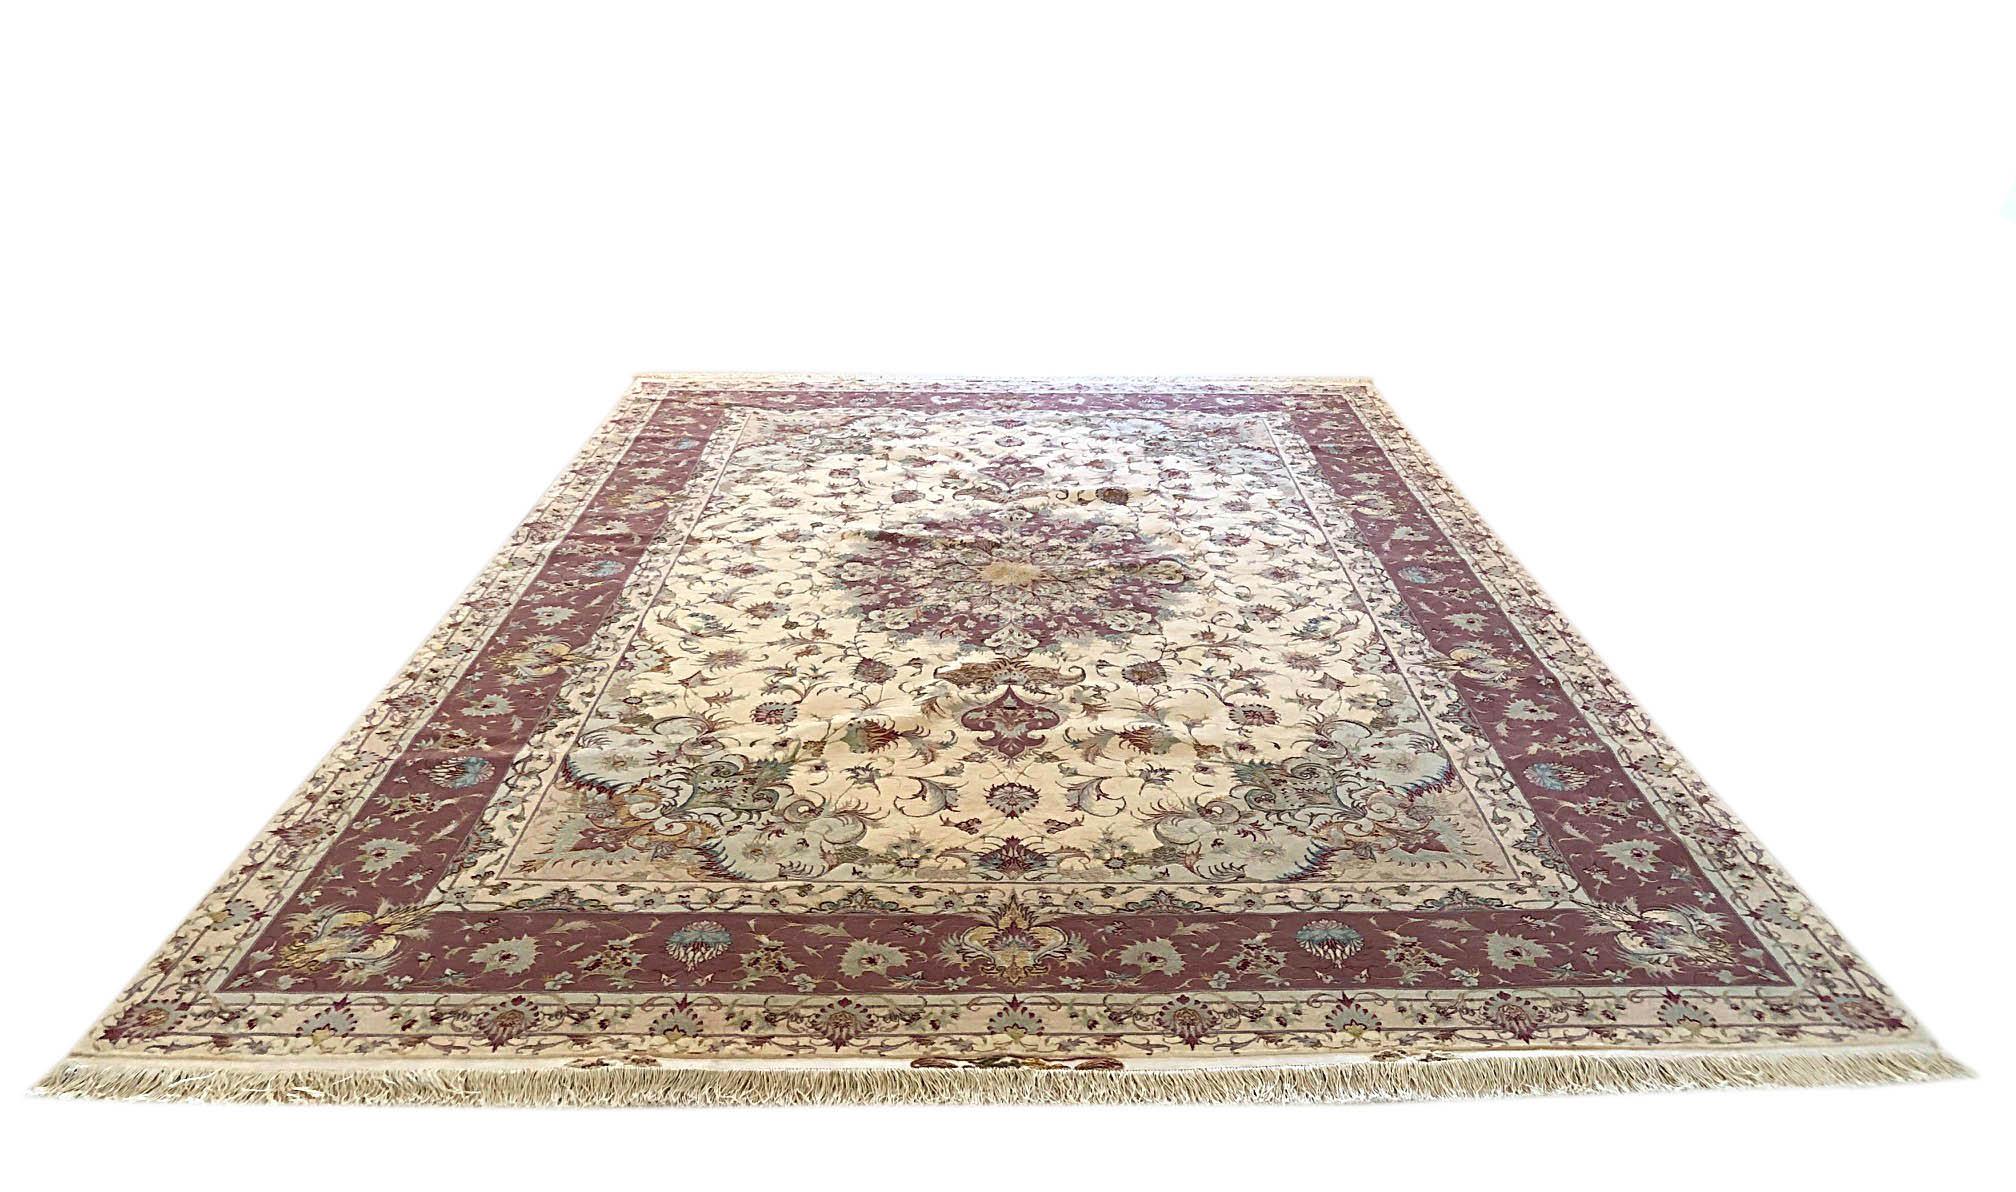 This is a hand knotted Persian Tabriz rug with a floral medallion design. The pile is wool and silk with silk foundation. The size is 8 feet 4 inches wide by feet 11 feet 10 inches tall. This rug is a brand new rug. This beautiful rug features a